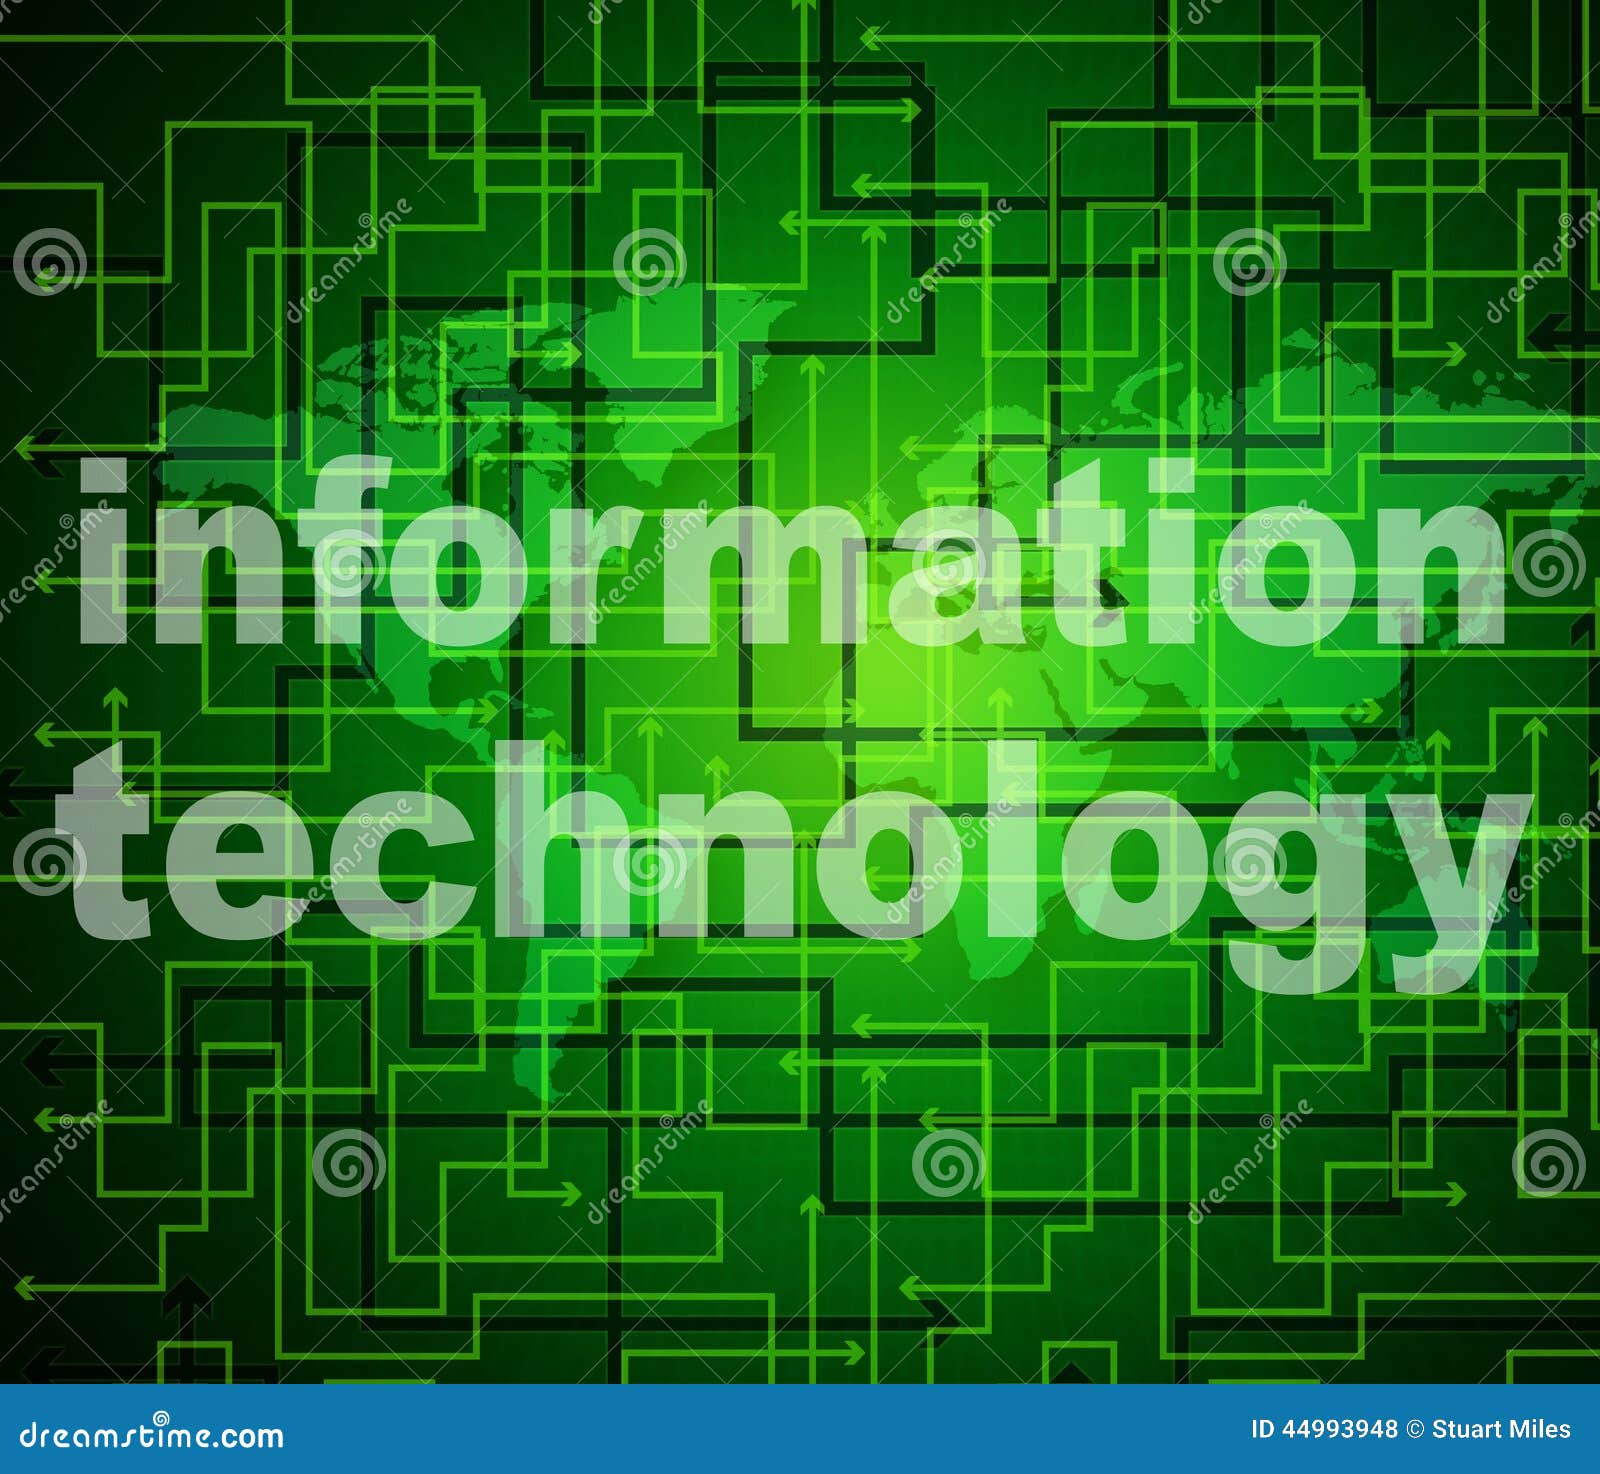 Information Technology Shows Assistance Data and High-Tech Stock ...